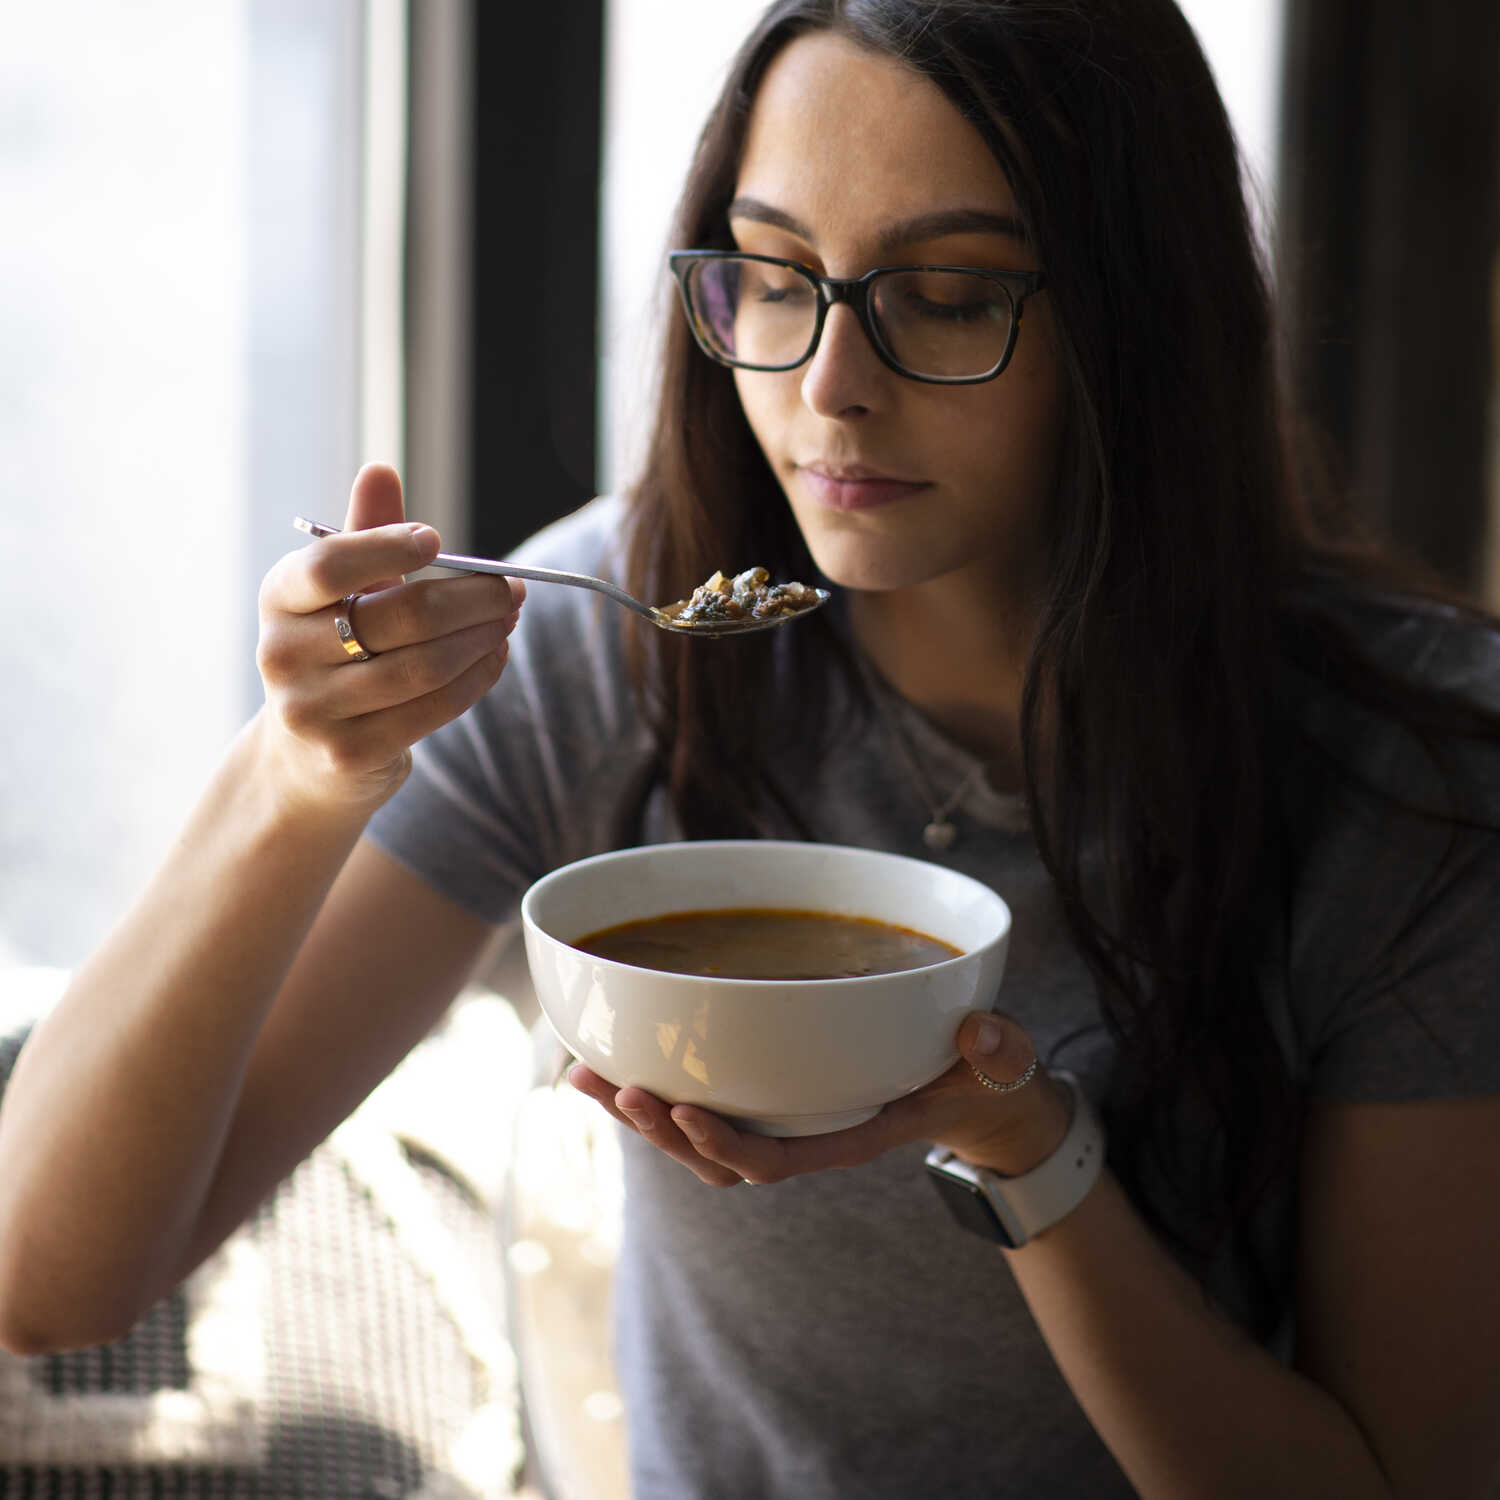 young woman, thinking about savoring soup